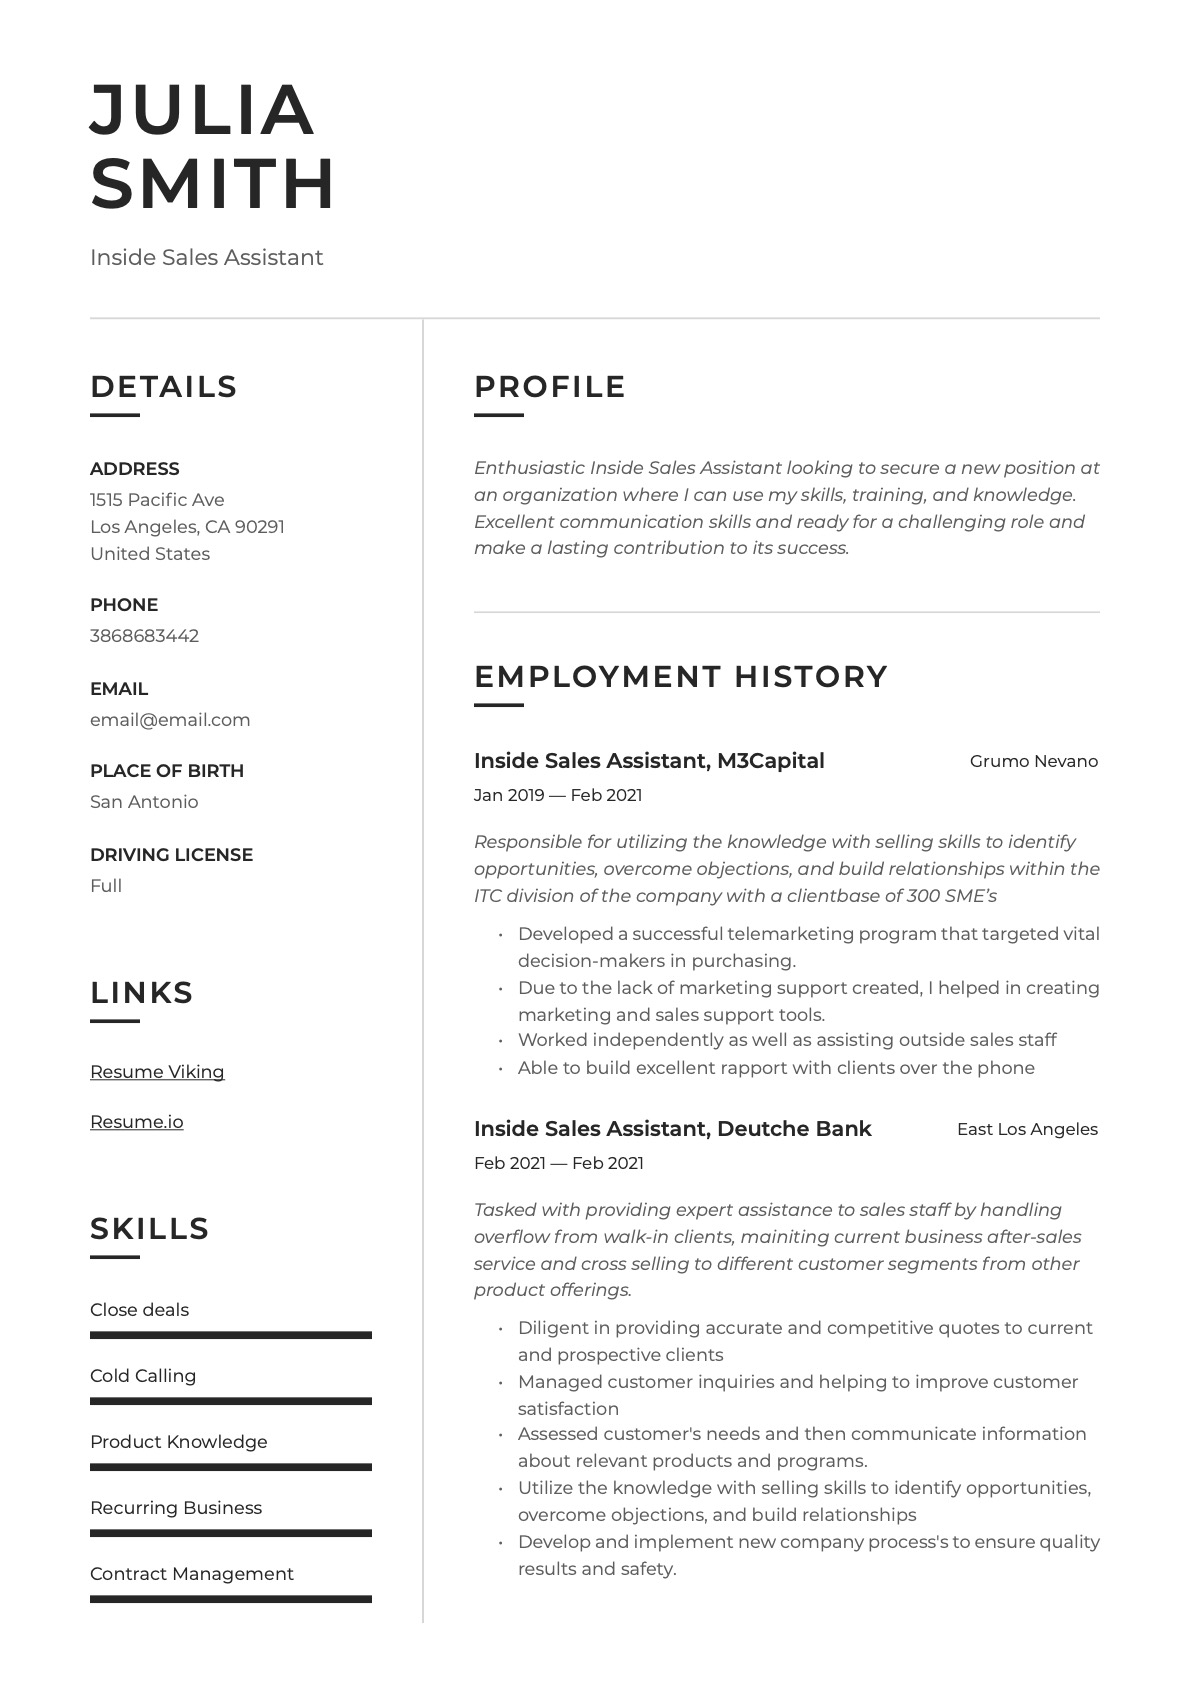 Example Resume Inside Sales Assistant-14